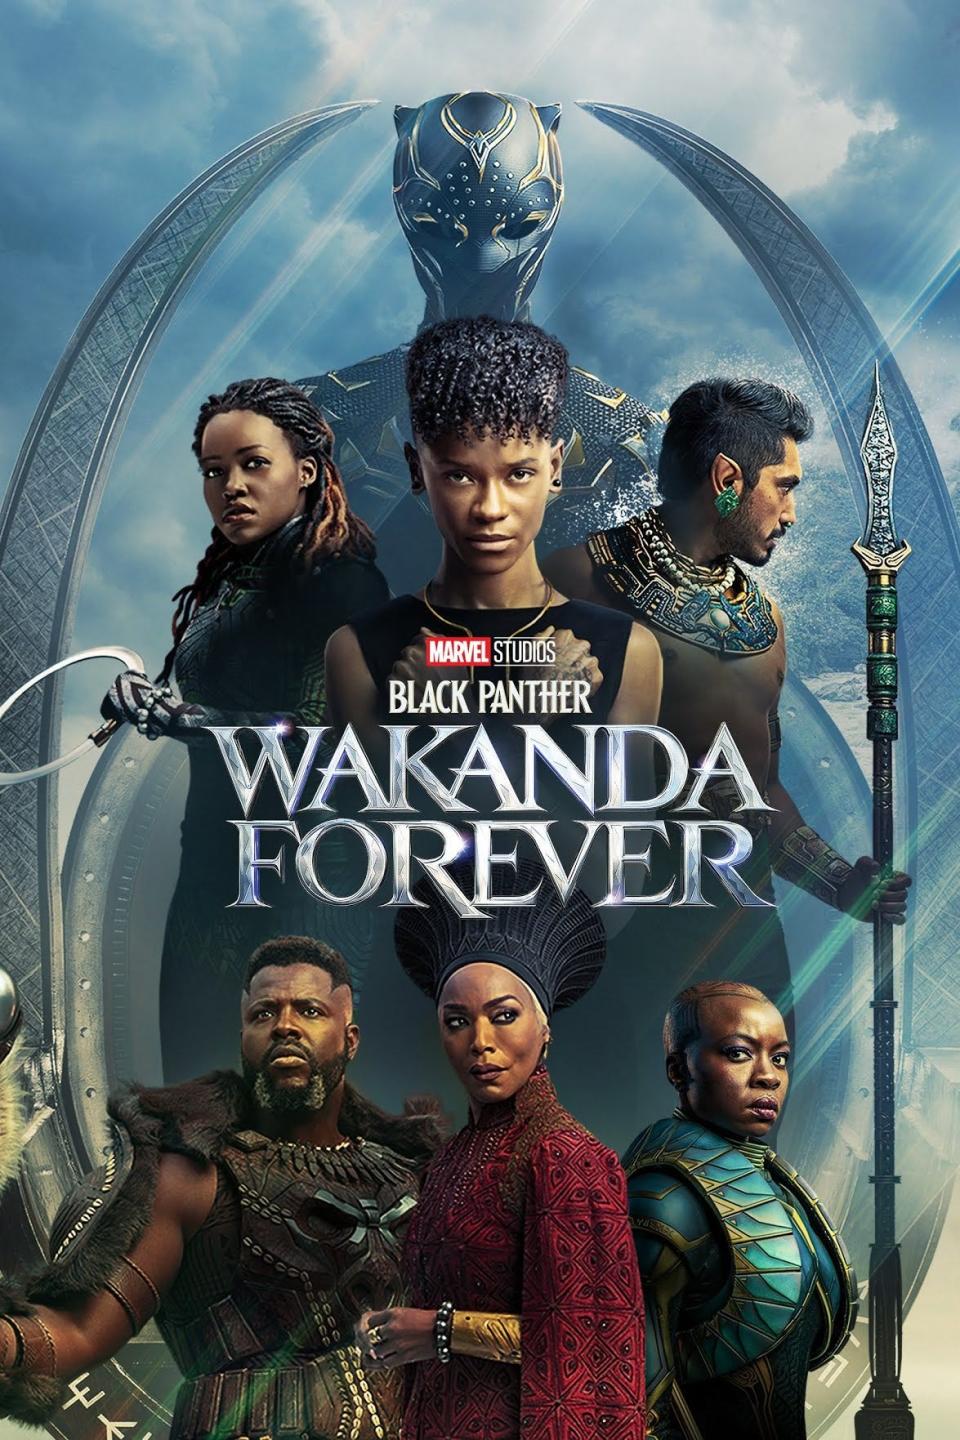 An outdoor screening of 'Black Panther: Wakanda Forever' will play at Campus Martius Park as part of Downtown Detroit Partnership's Movie Nights in the D series.